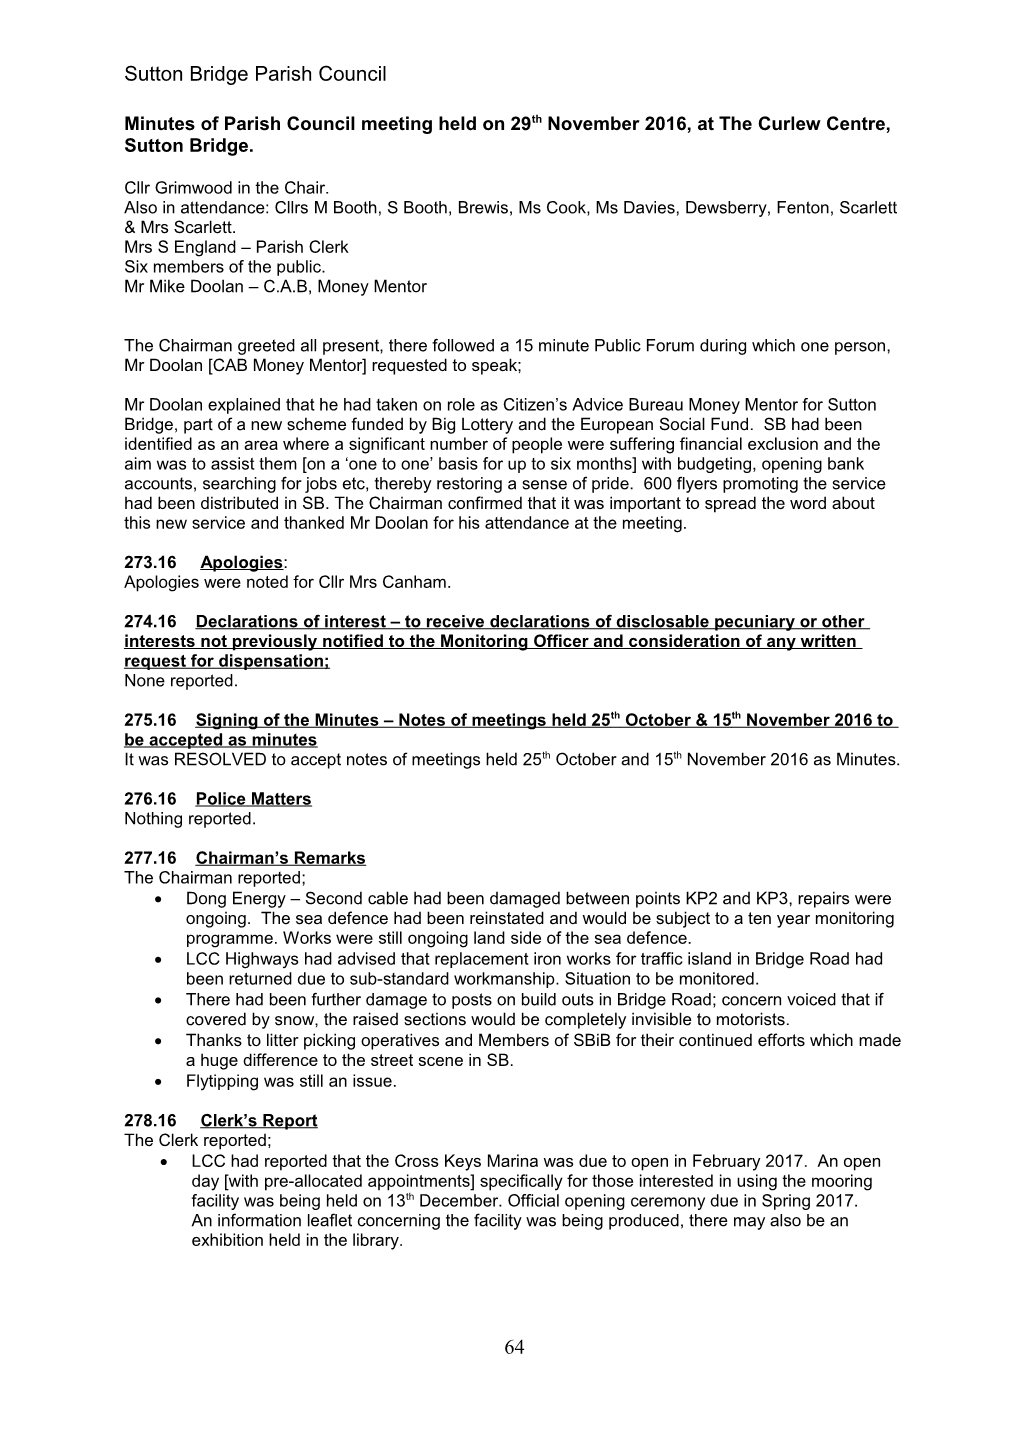 Minutes of the Parish Council Meeting Held on 27Th March 2012 at the Curlew Centre, Sutton